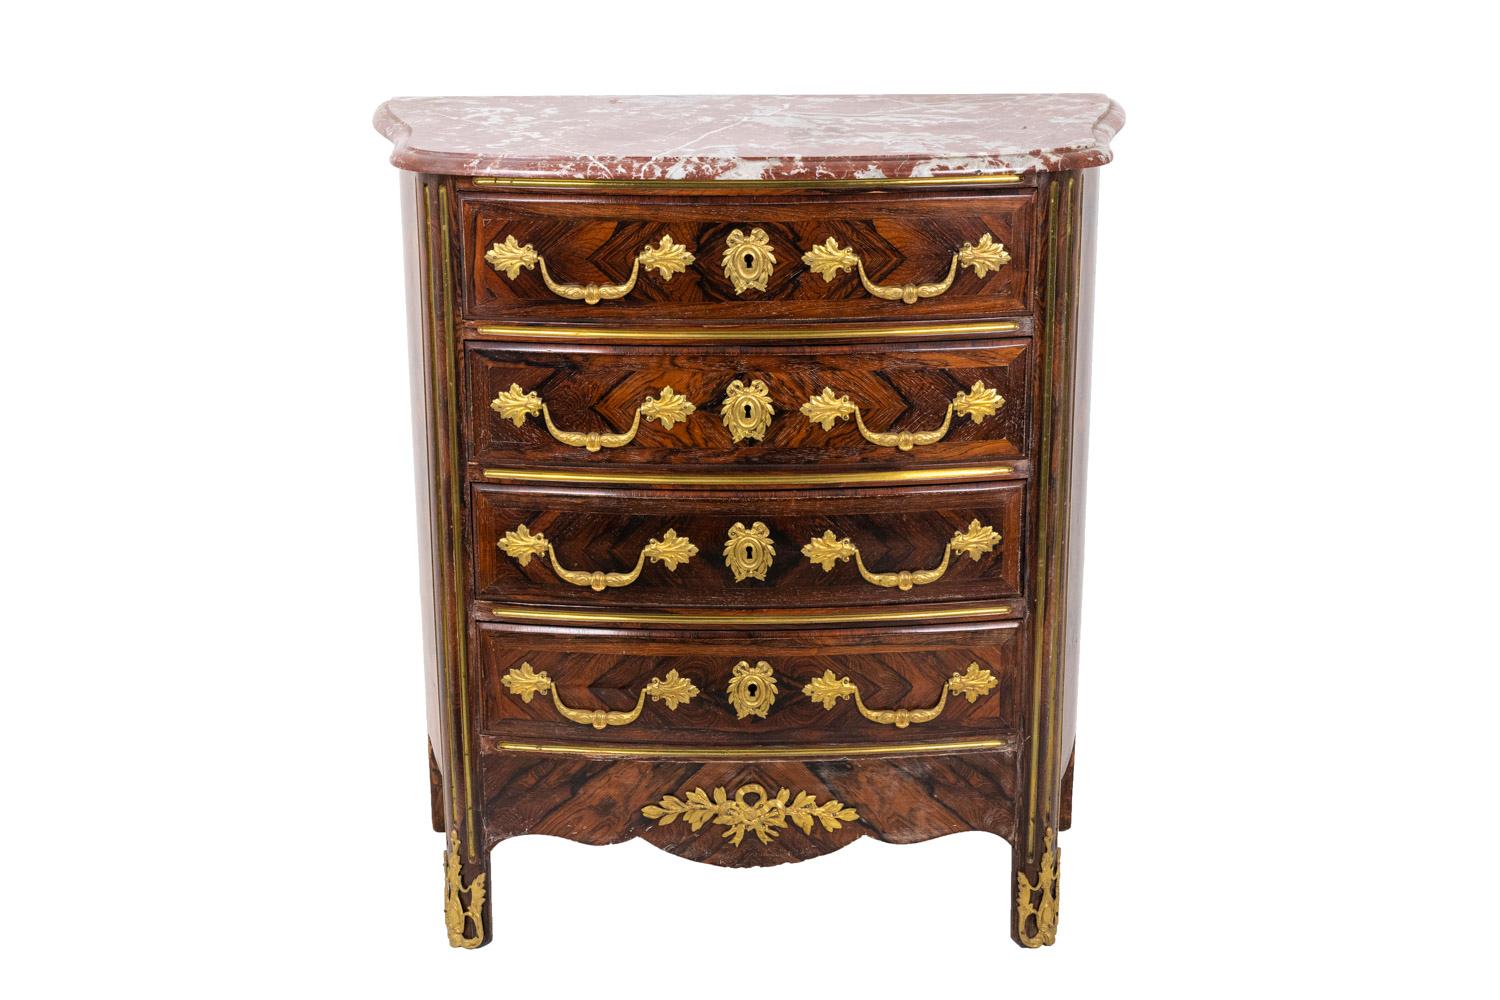 Regency Regence Style Commode in Violetwood, circa 1880